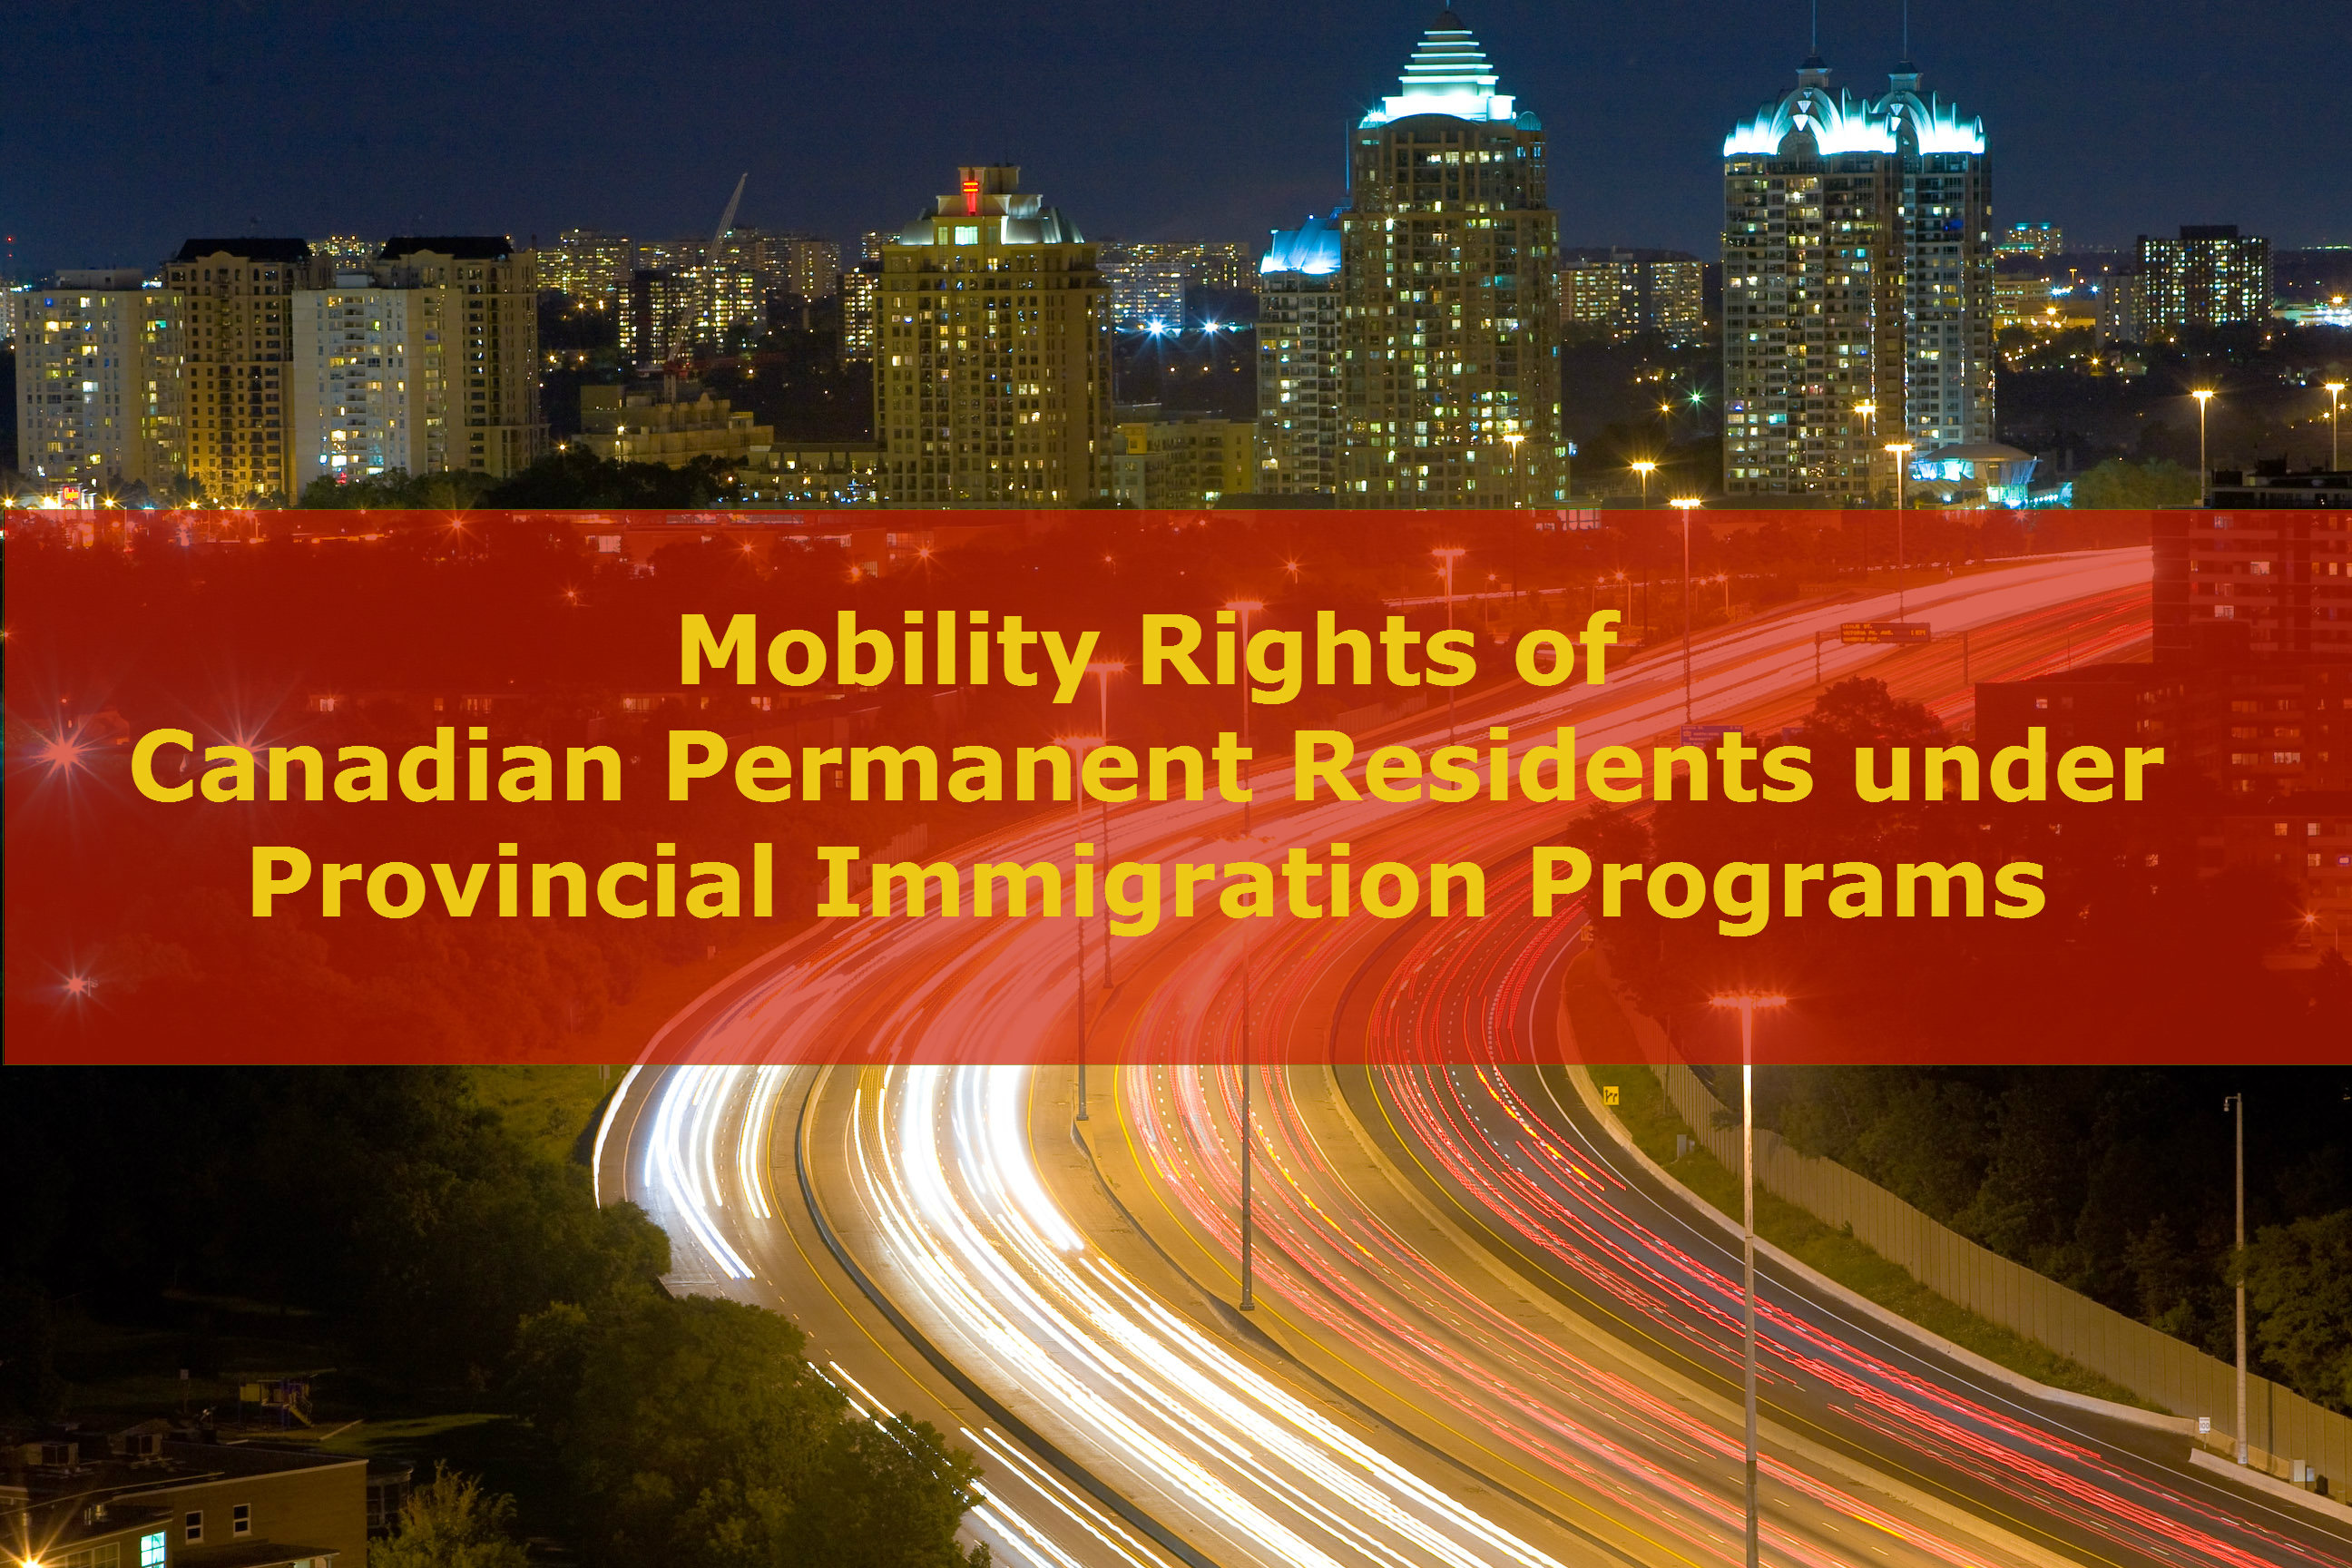 Canadian Immigration: Mobility Rights of Canadian Permanent Residents under Provincial Immigration Programs